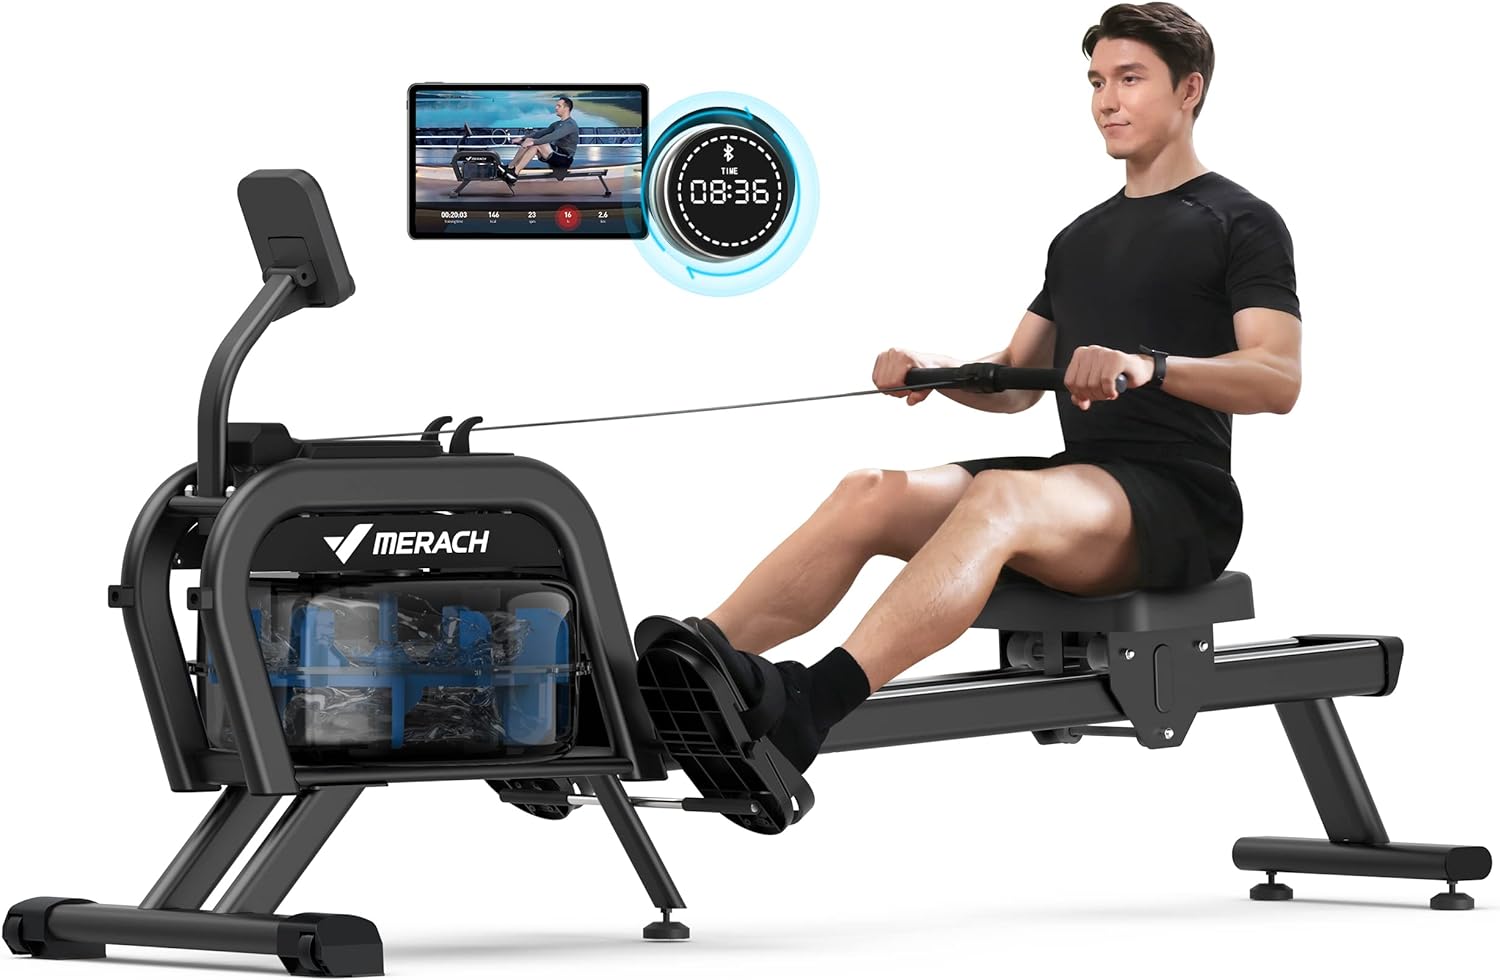 MERACH Water Magnetic Rowing Machine Review